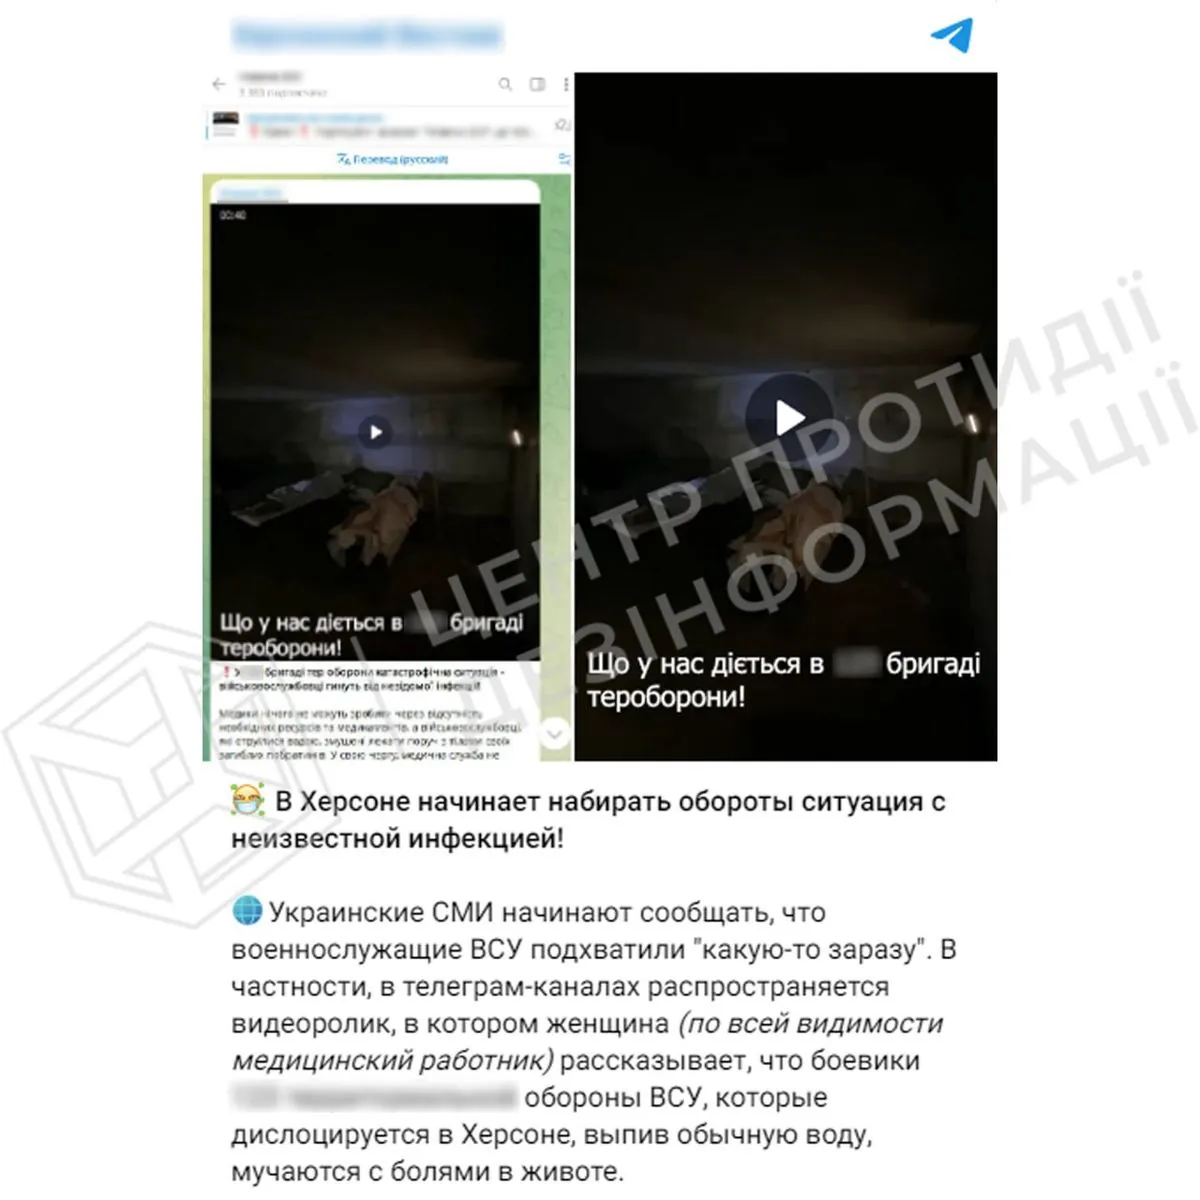 russians spread fake news about an outbreak of an unknown infection among the military in Kherson